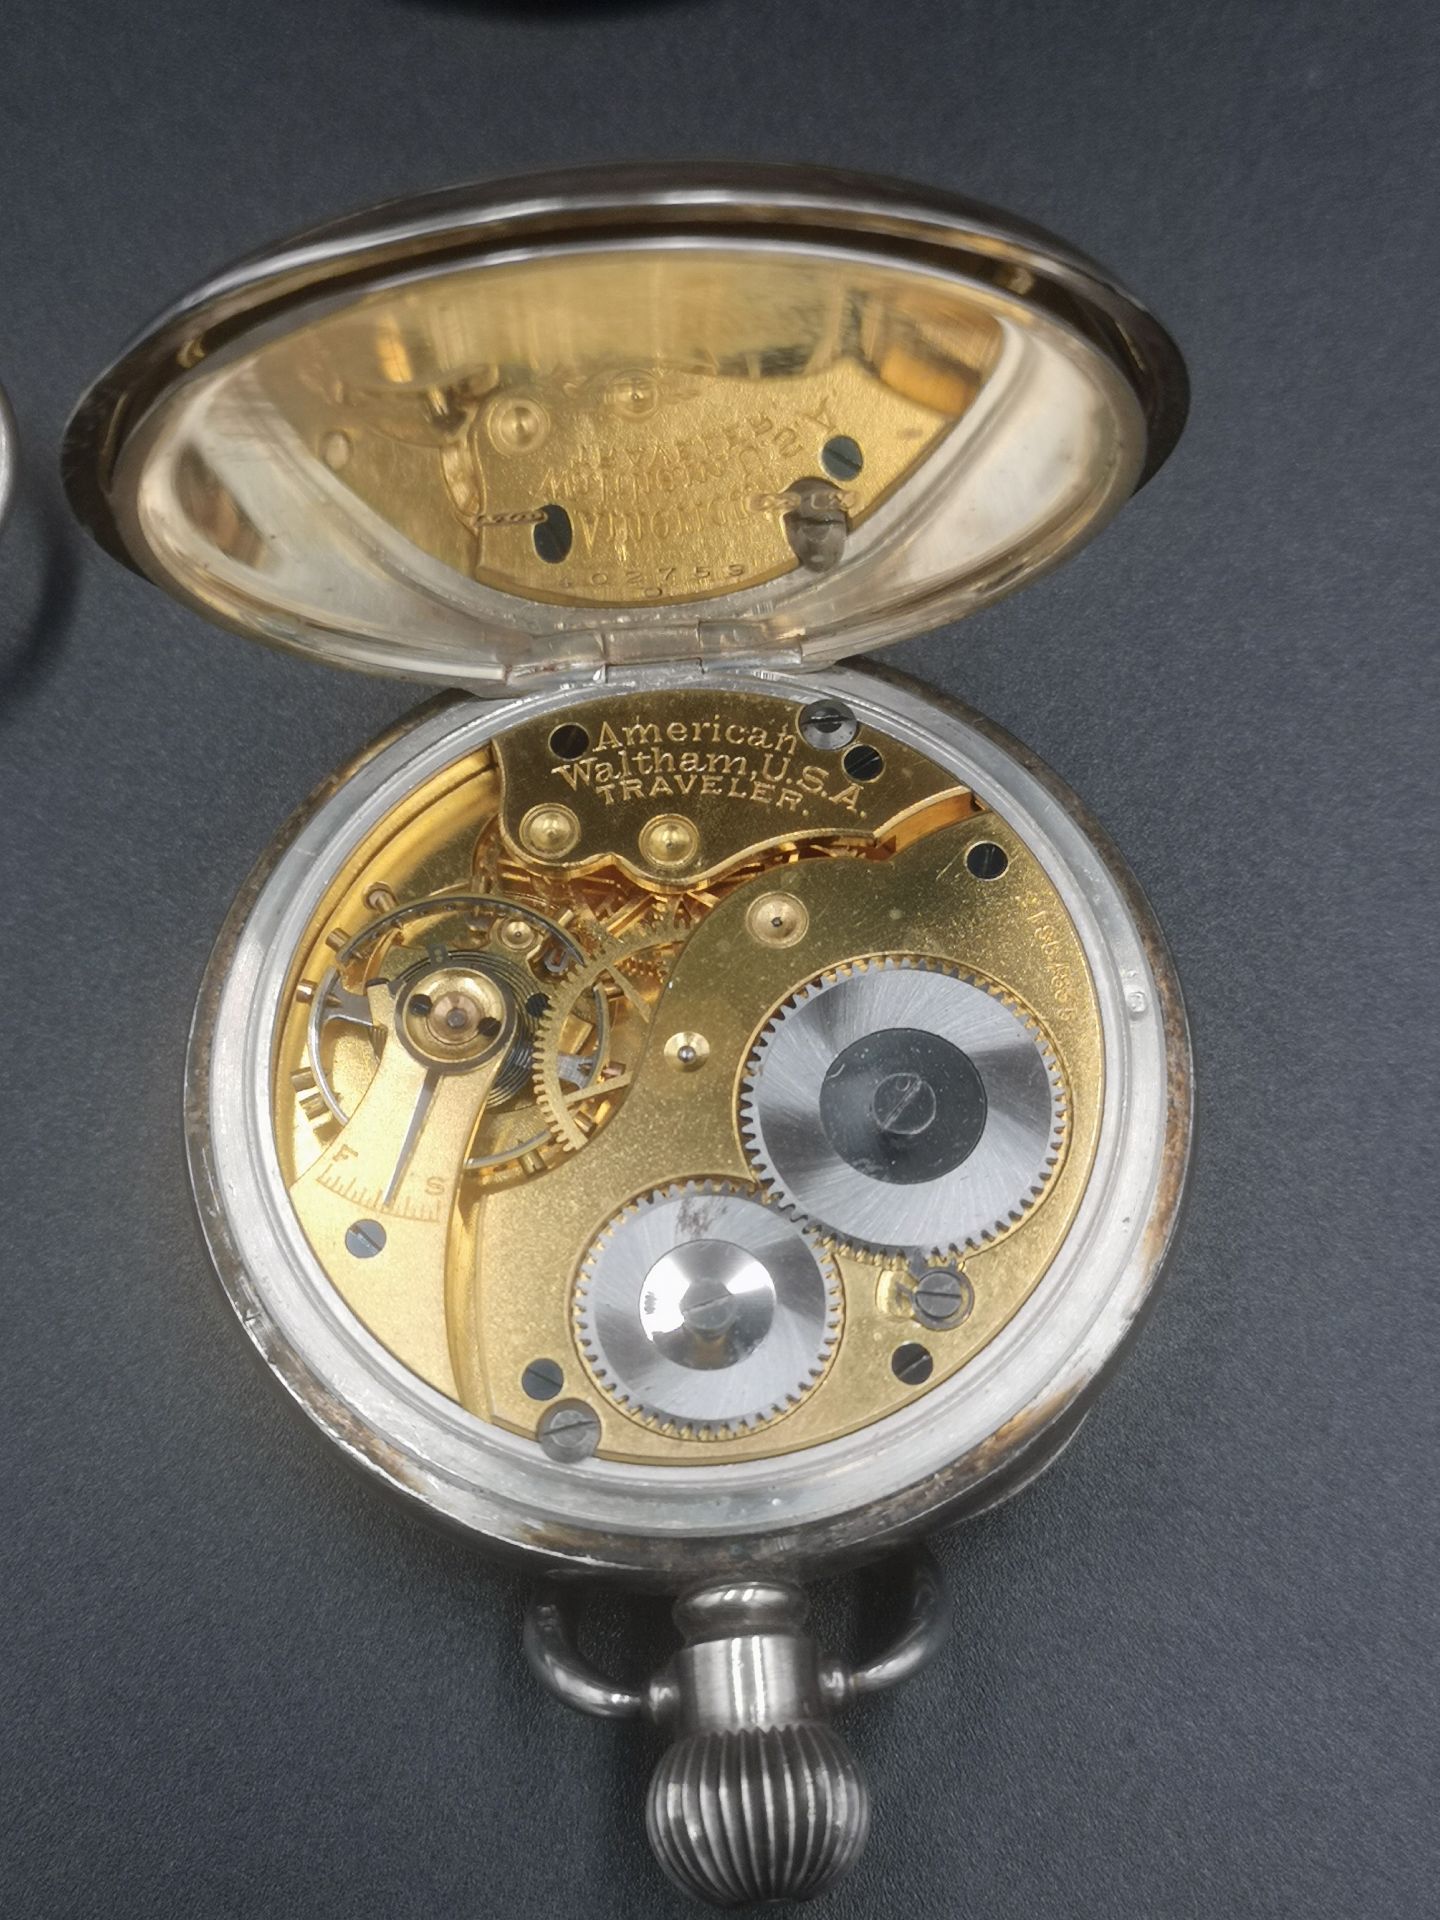 Waltham silver cased pocket watch; a pocket watch; rolled gold pair of spectacles - Image 6 of 7